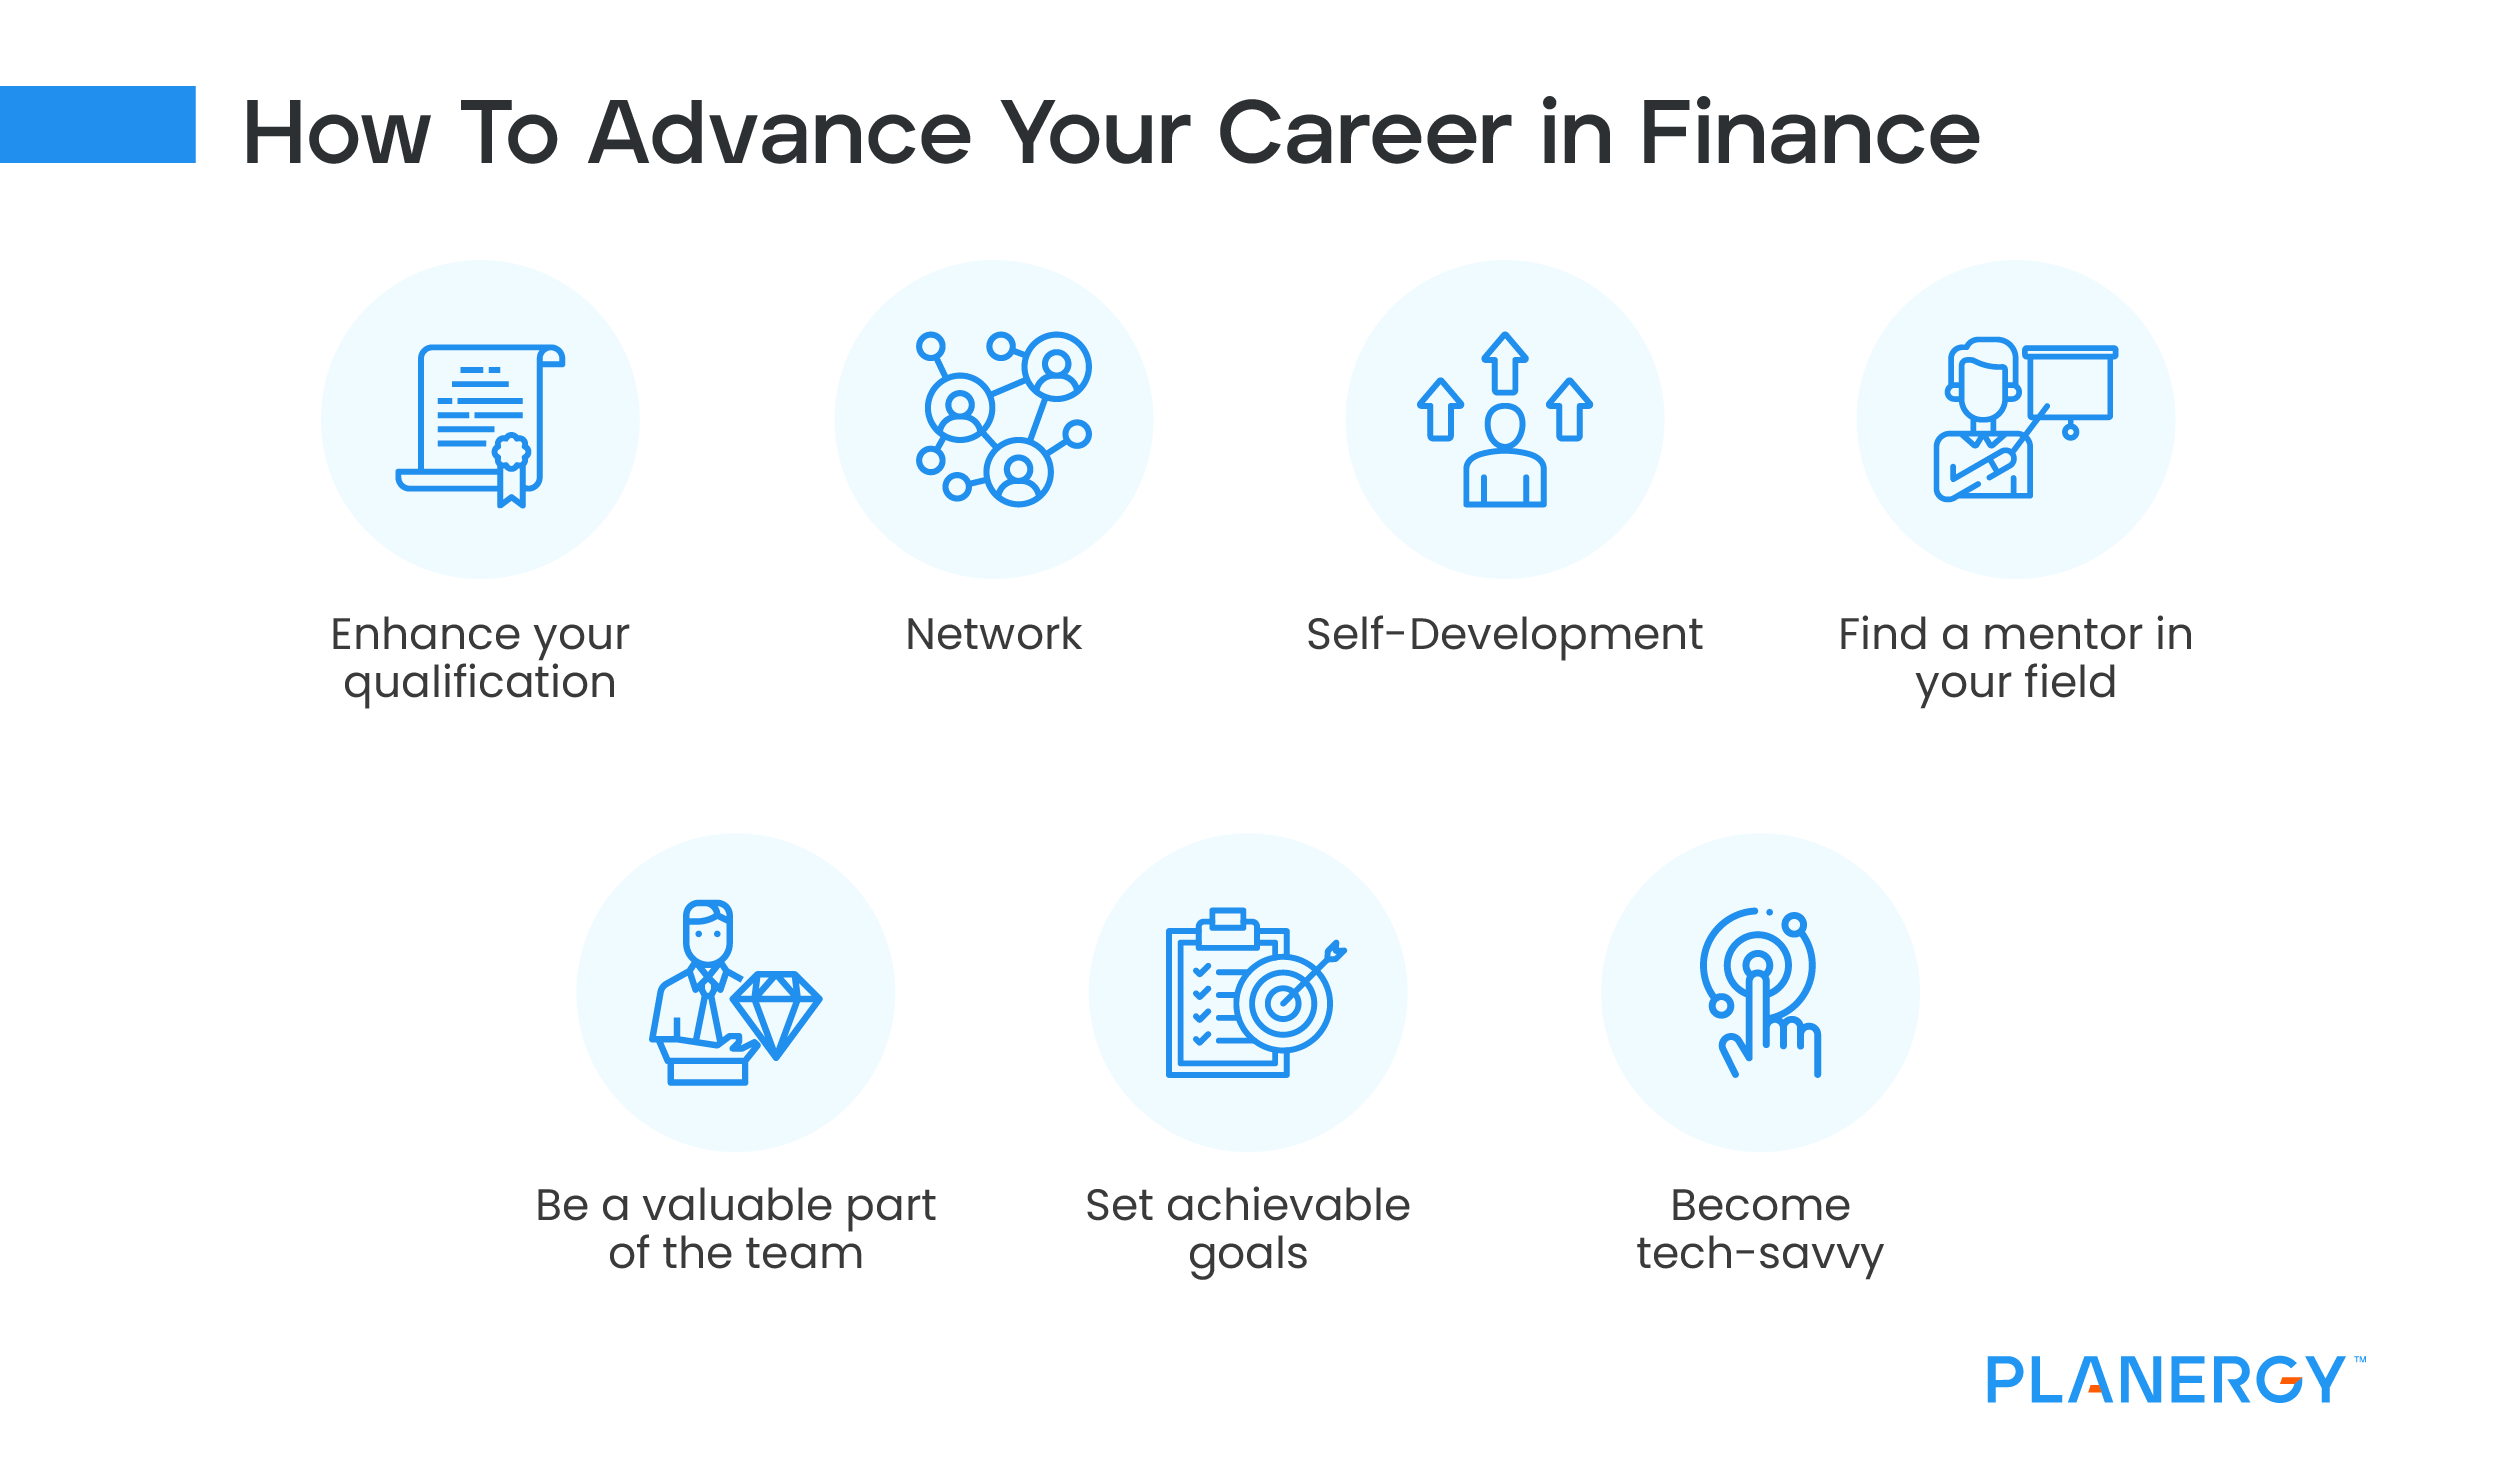 How to Advance Your Career in Finance